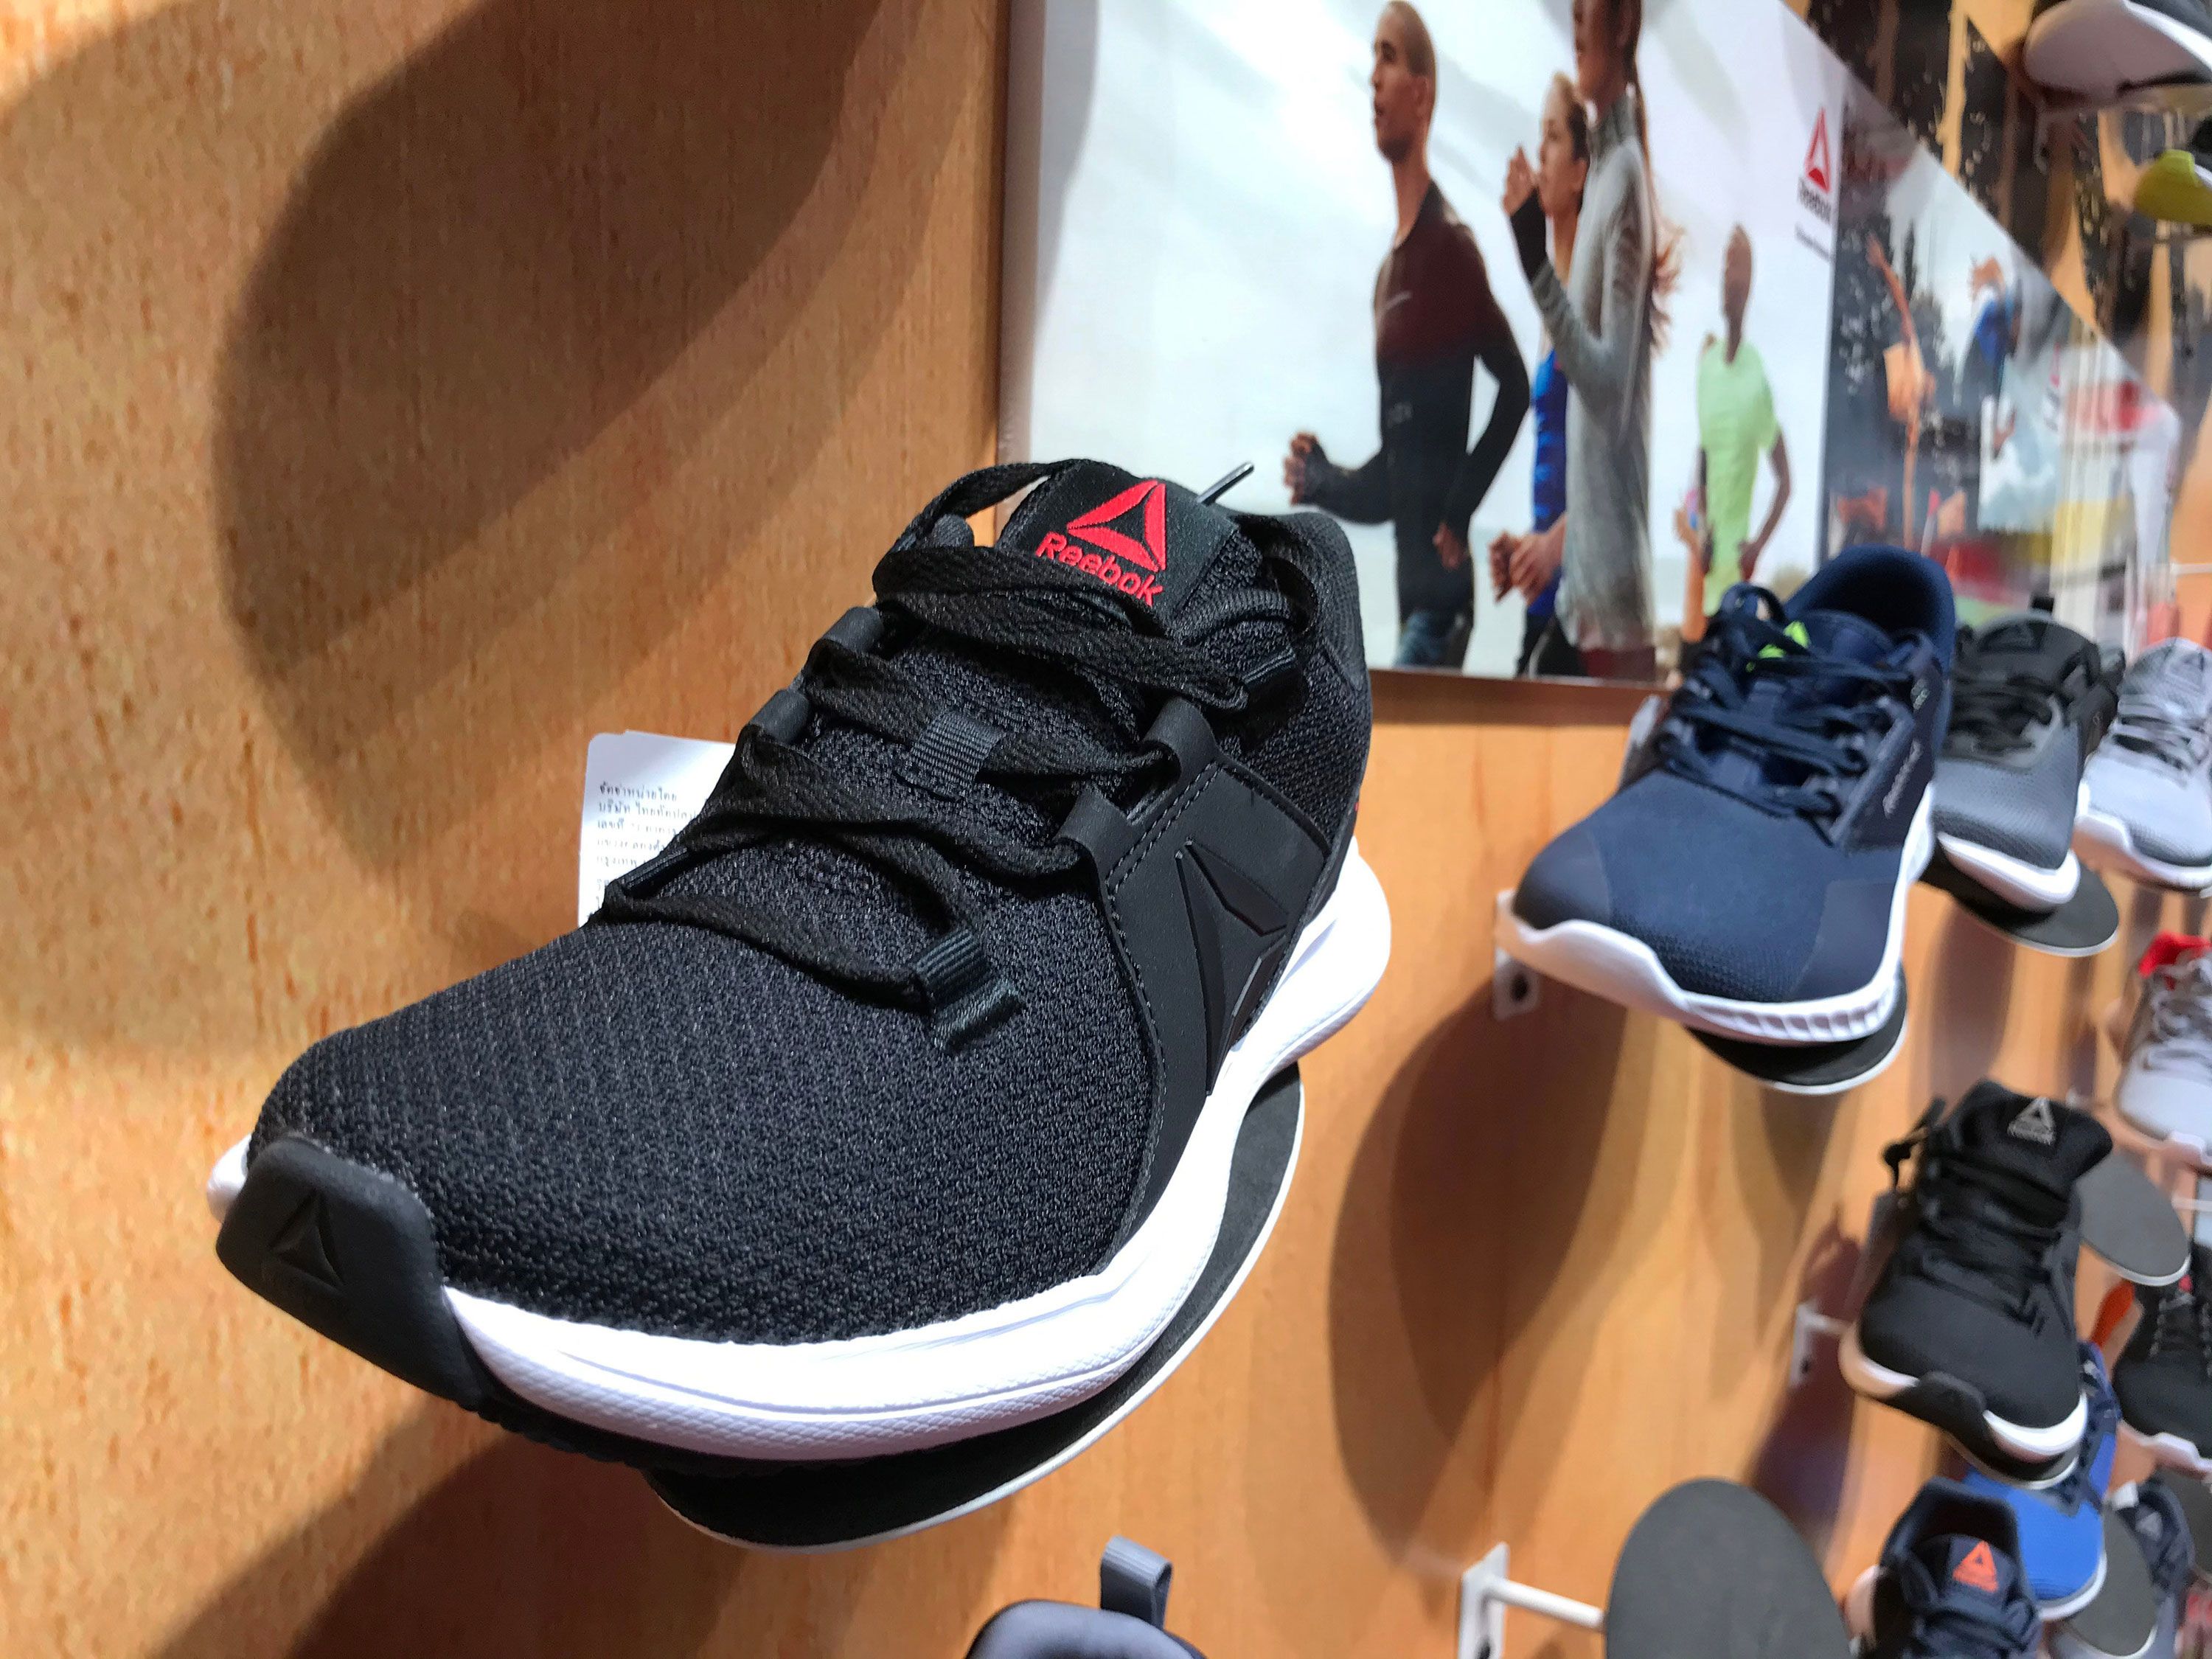 Reebok New Owner Is ABG. Analysts Predict What's Next for the Brand.